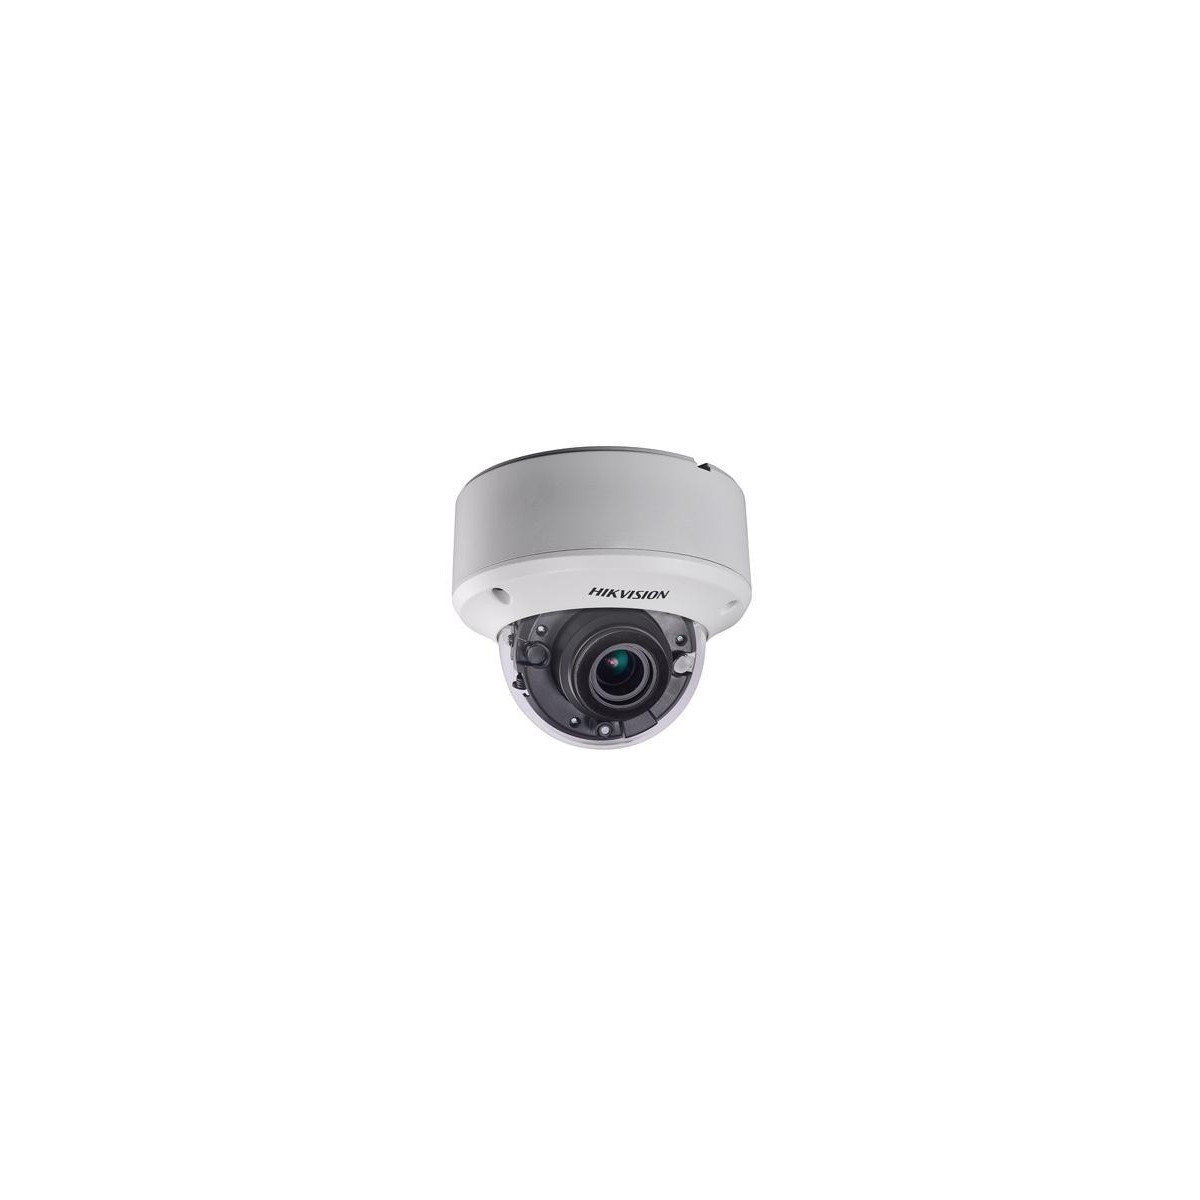 Hikvision Digital Technology DS-2CE56D8T-AVPIT3ZF - CCTV security camera - Outdoor - Wired - English - Dome - Ceiling/wall